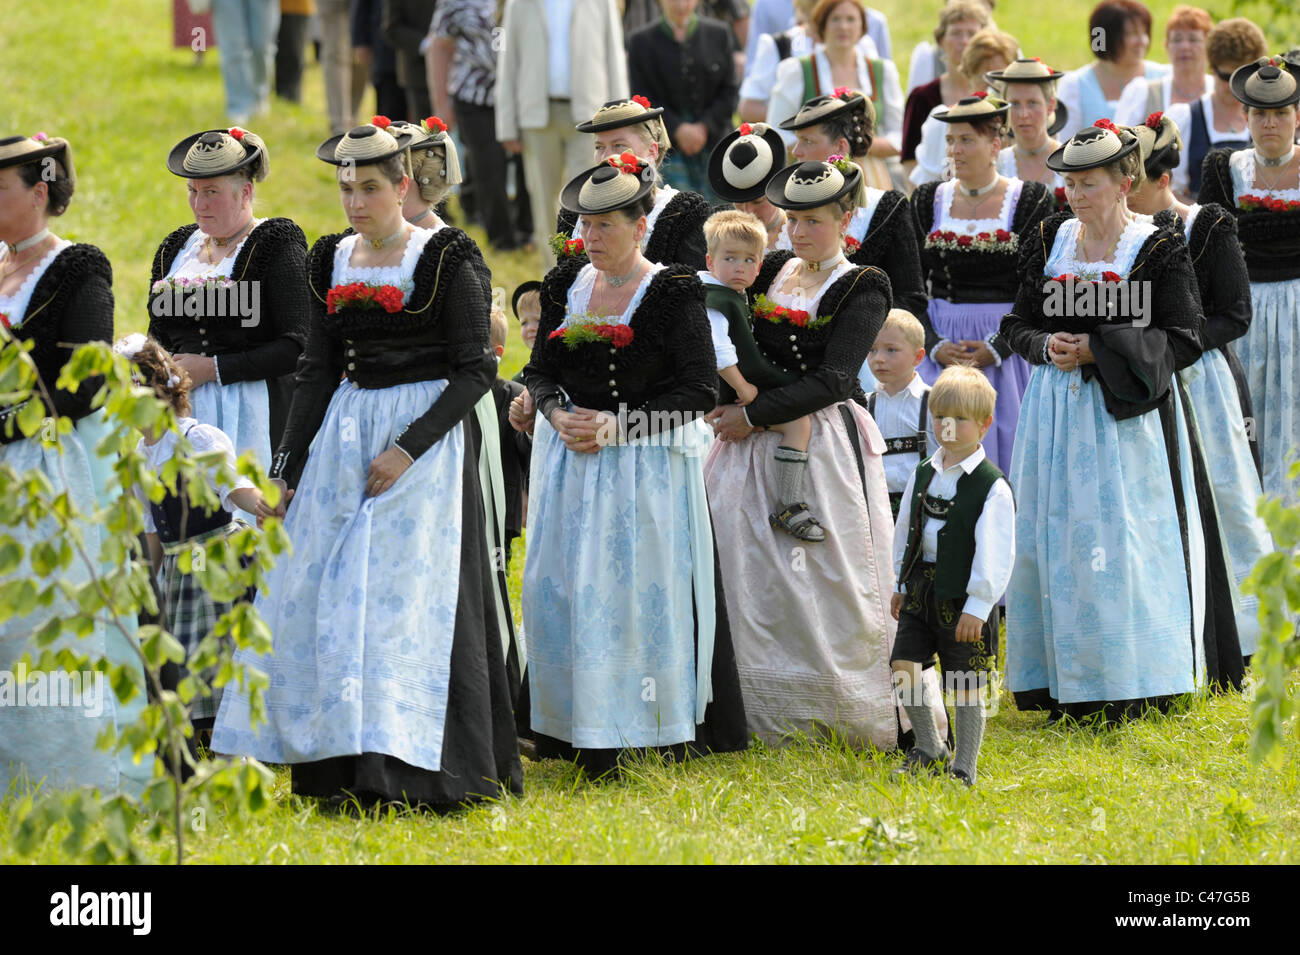 catholic traditional procession in costumes and typical bavarian clothes in Wackersberg, Bavaria, Germany Stock Photo